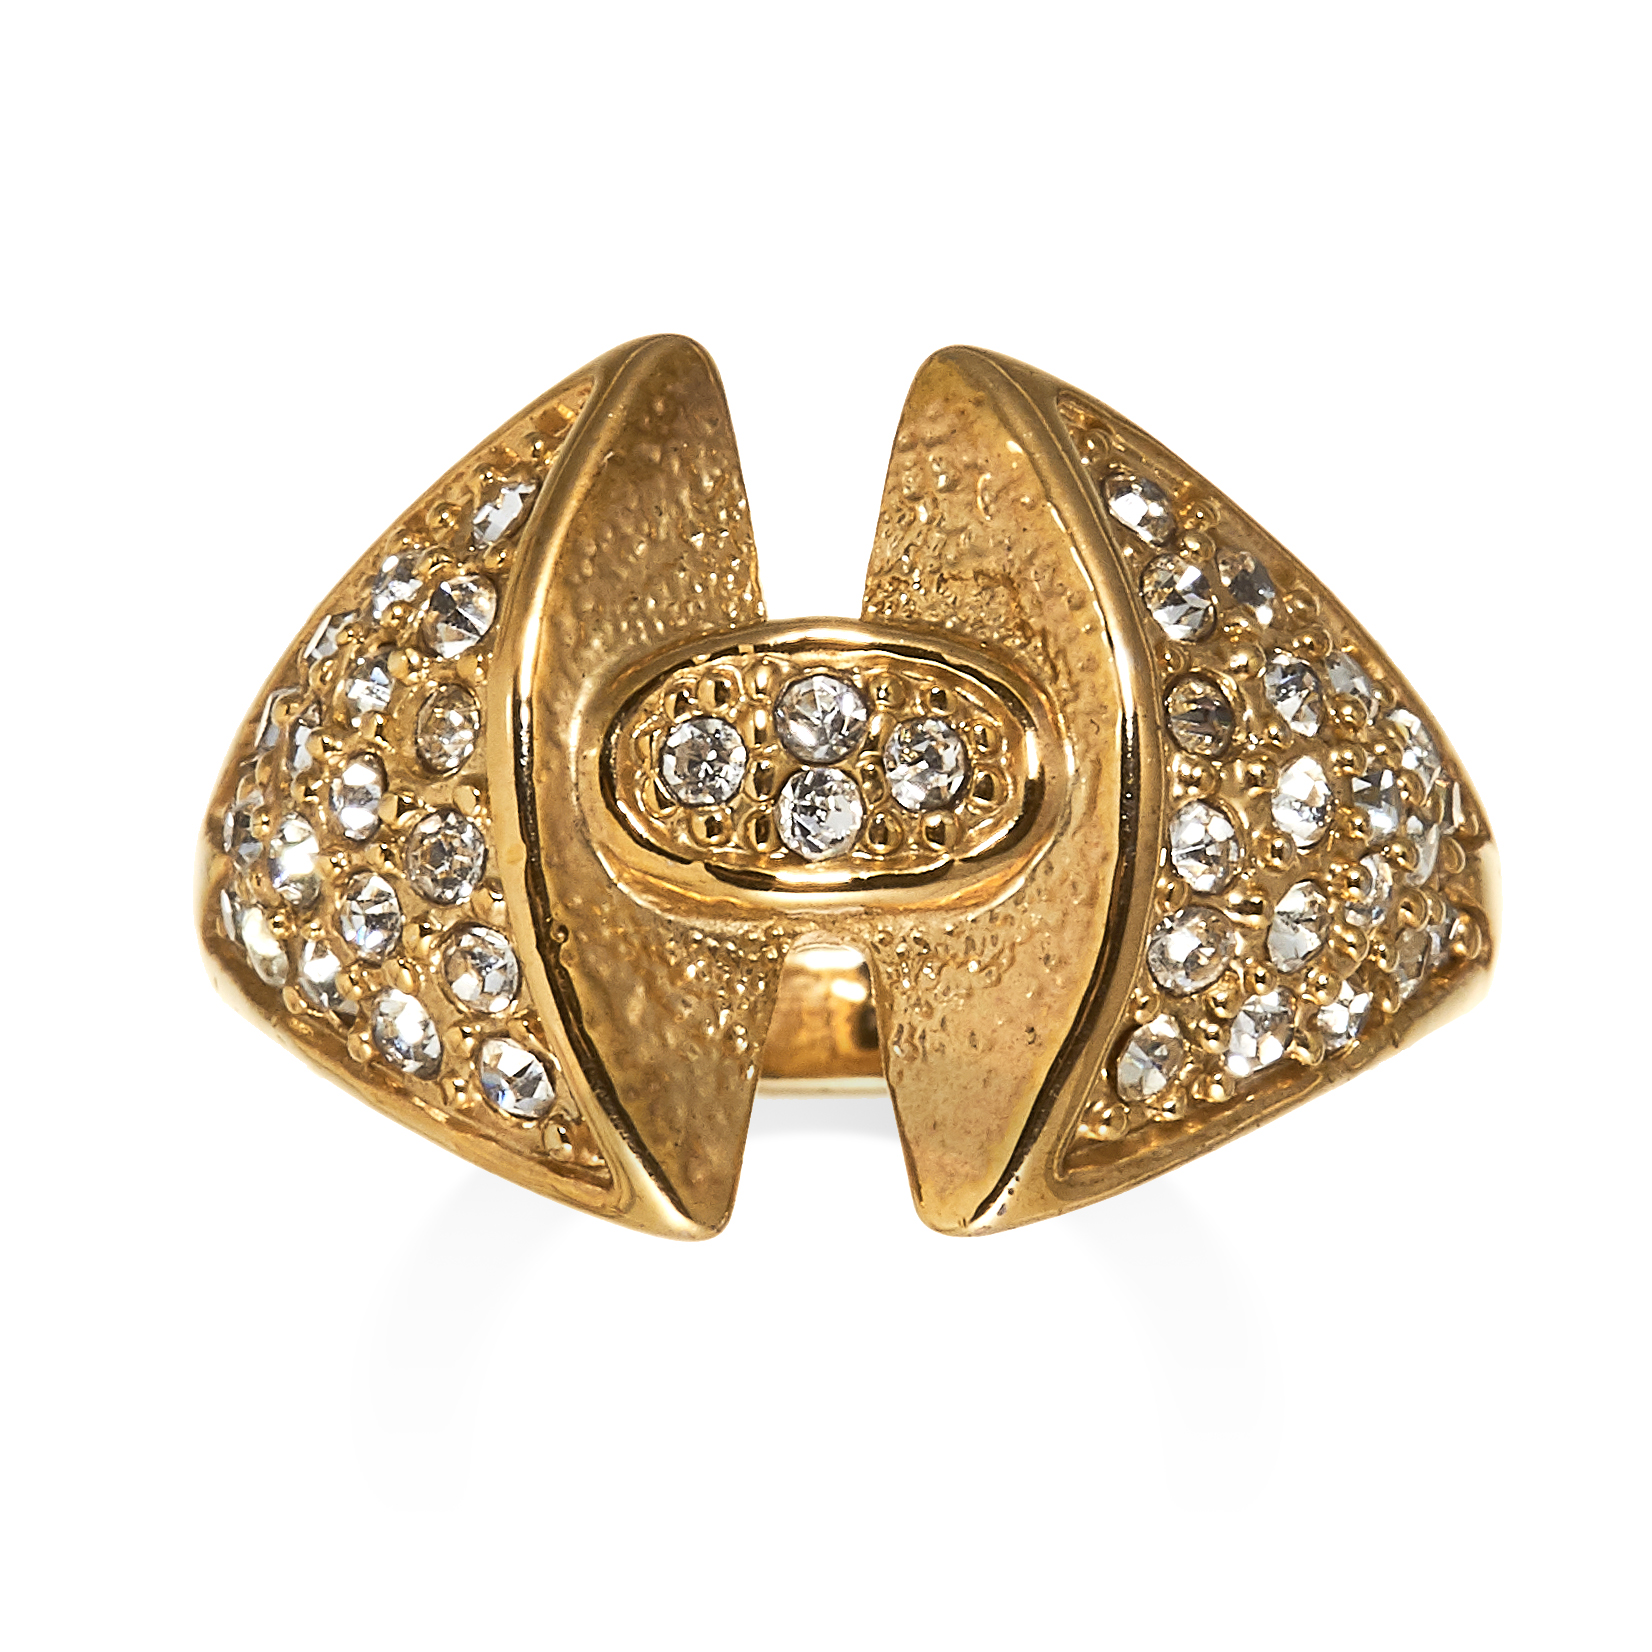 A DIAMOND DRESS RING in high carat yellow gold, the central oval motif set with round cut